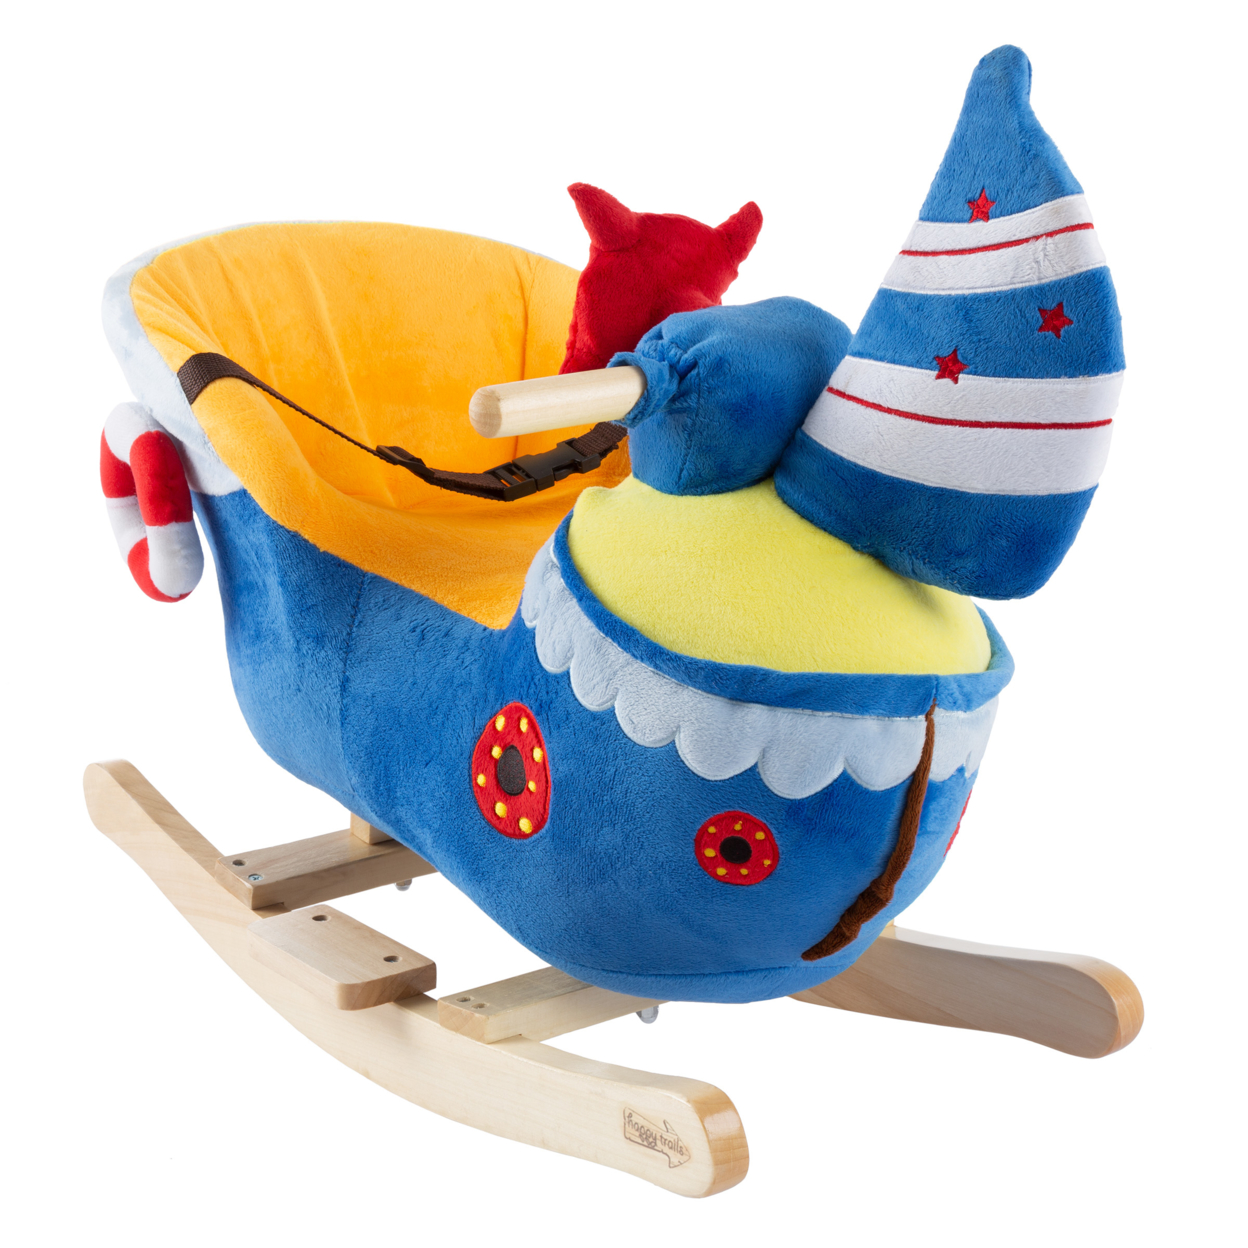 Boat Rocker Toy-Kids Ride On Soft Fabric Covered Wooden Rocking Ship-Neutral Design For Any Nursery